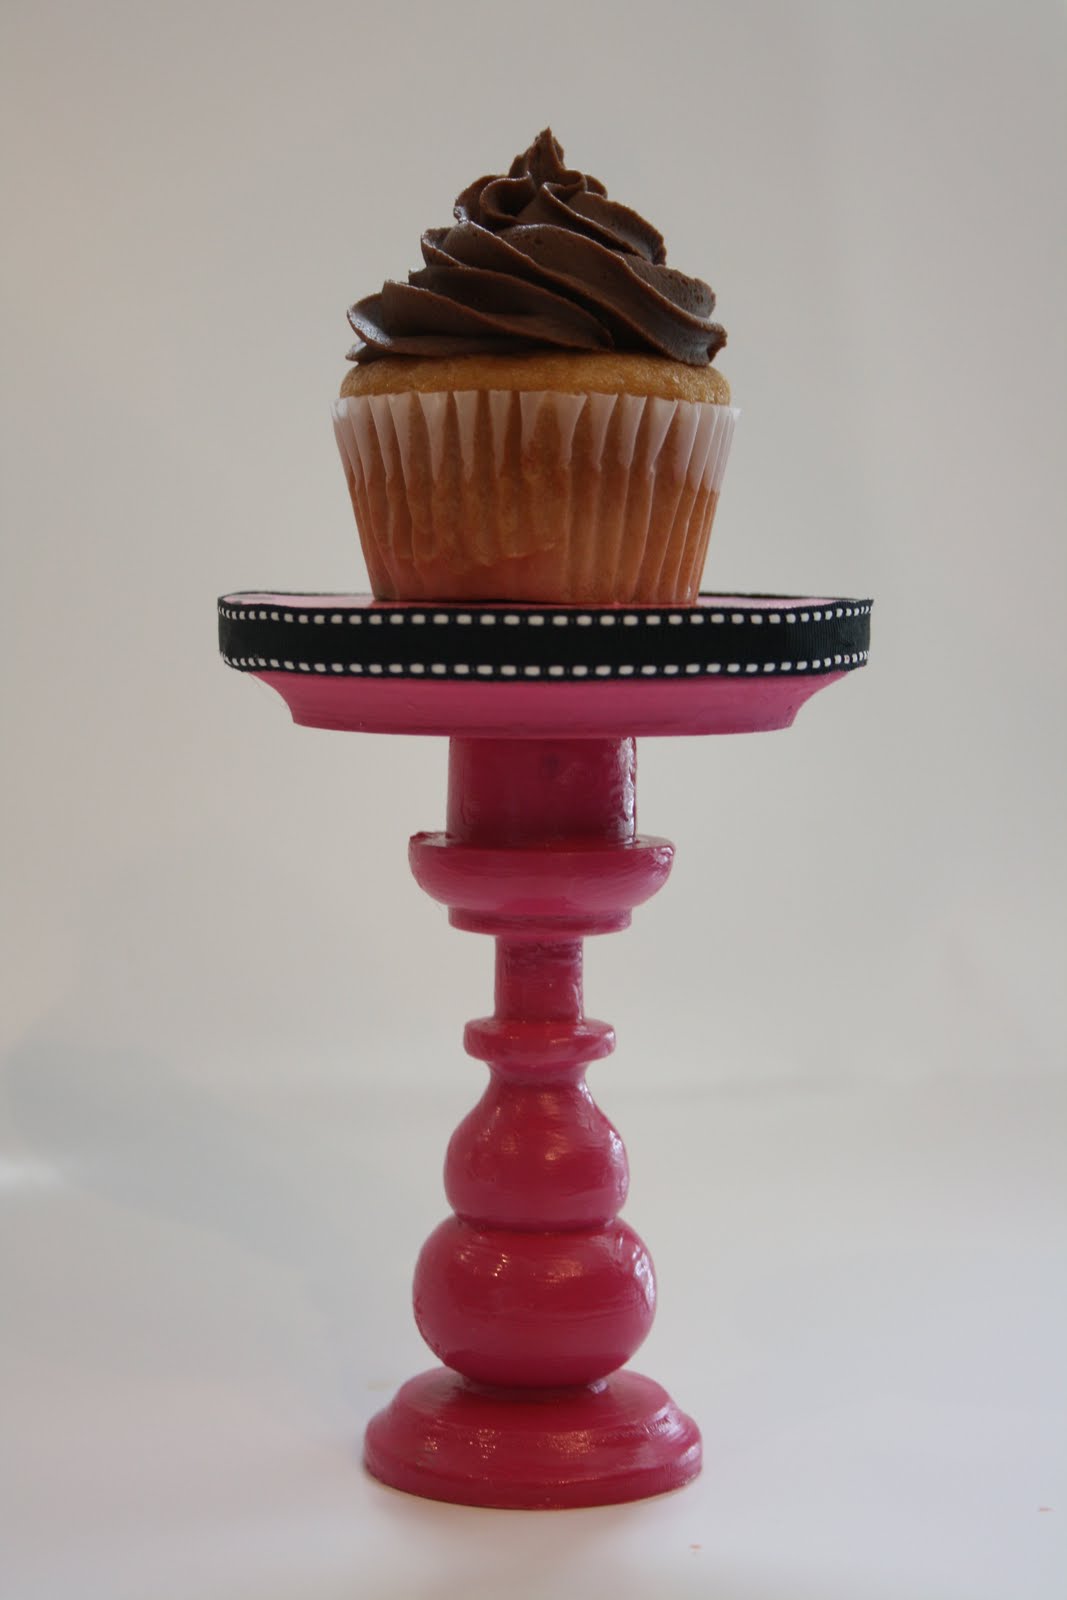 Single Cupcake Stand. 12pc Cupcake Serving Plate Stand Display (Clear).